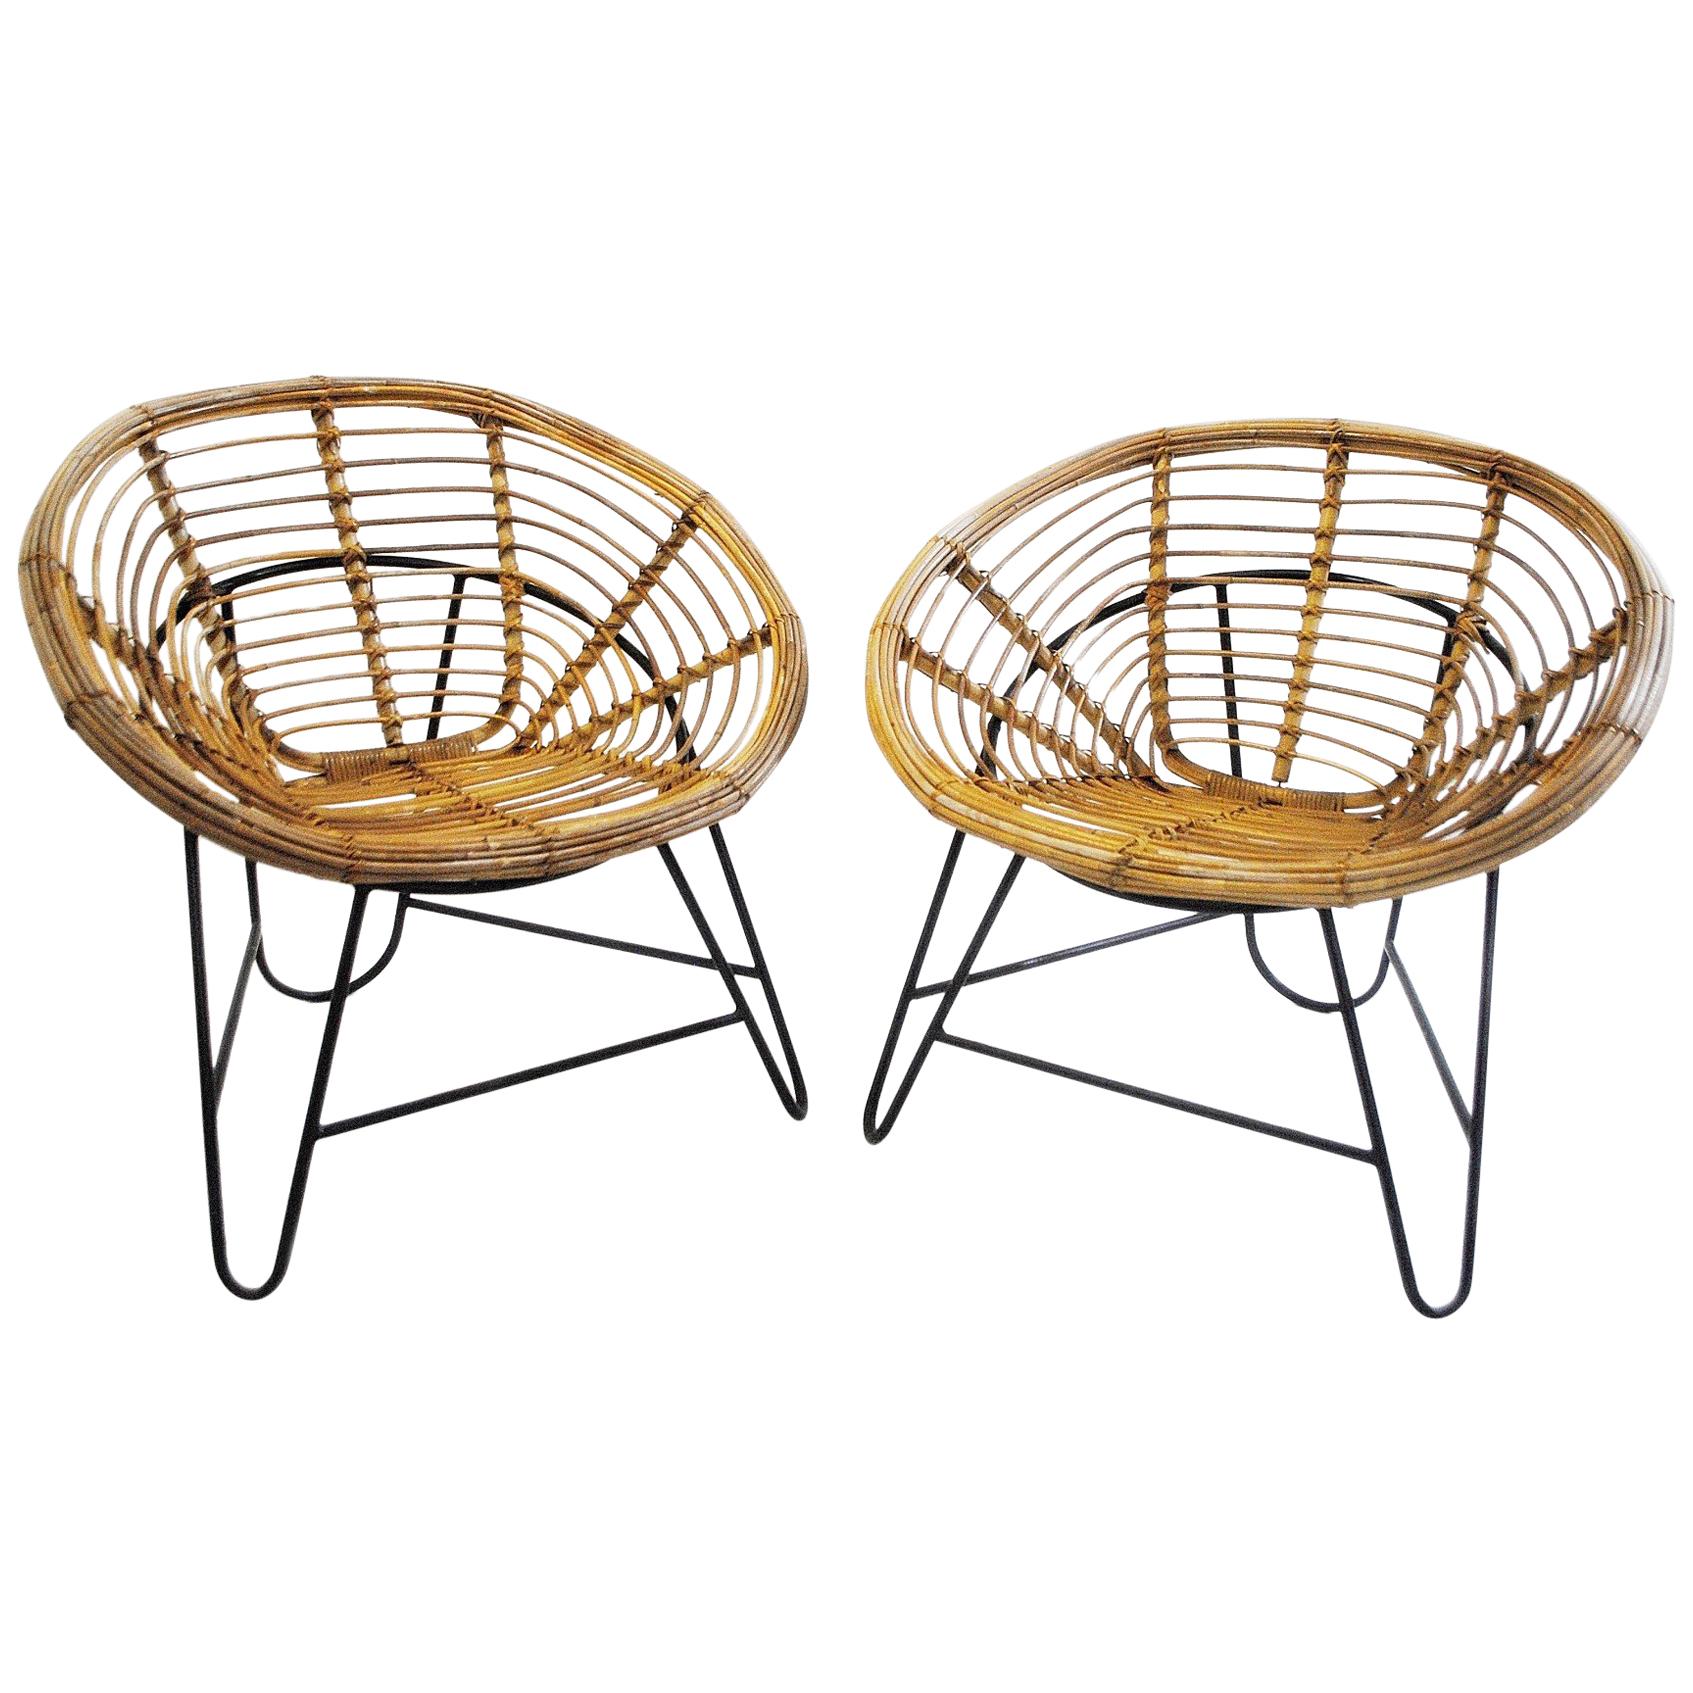 Lovely and Comfy Pair of Rattan Armchairs